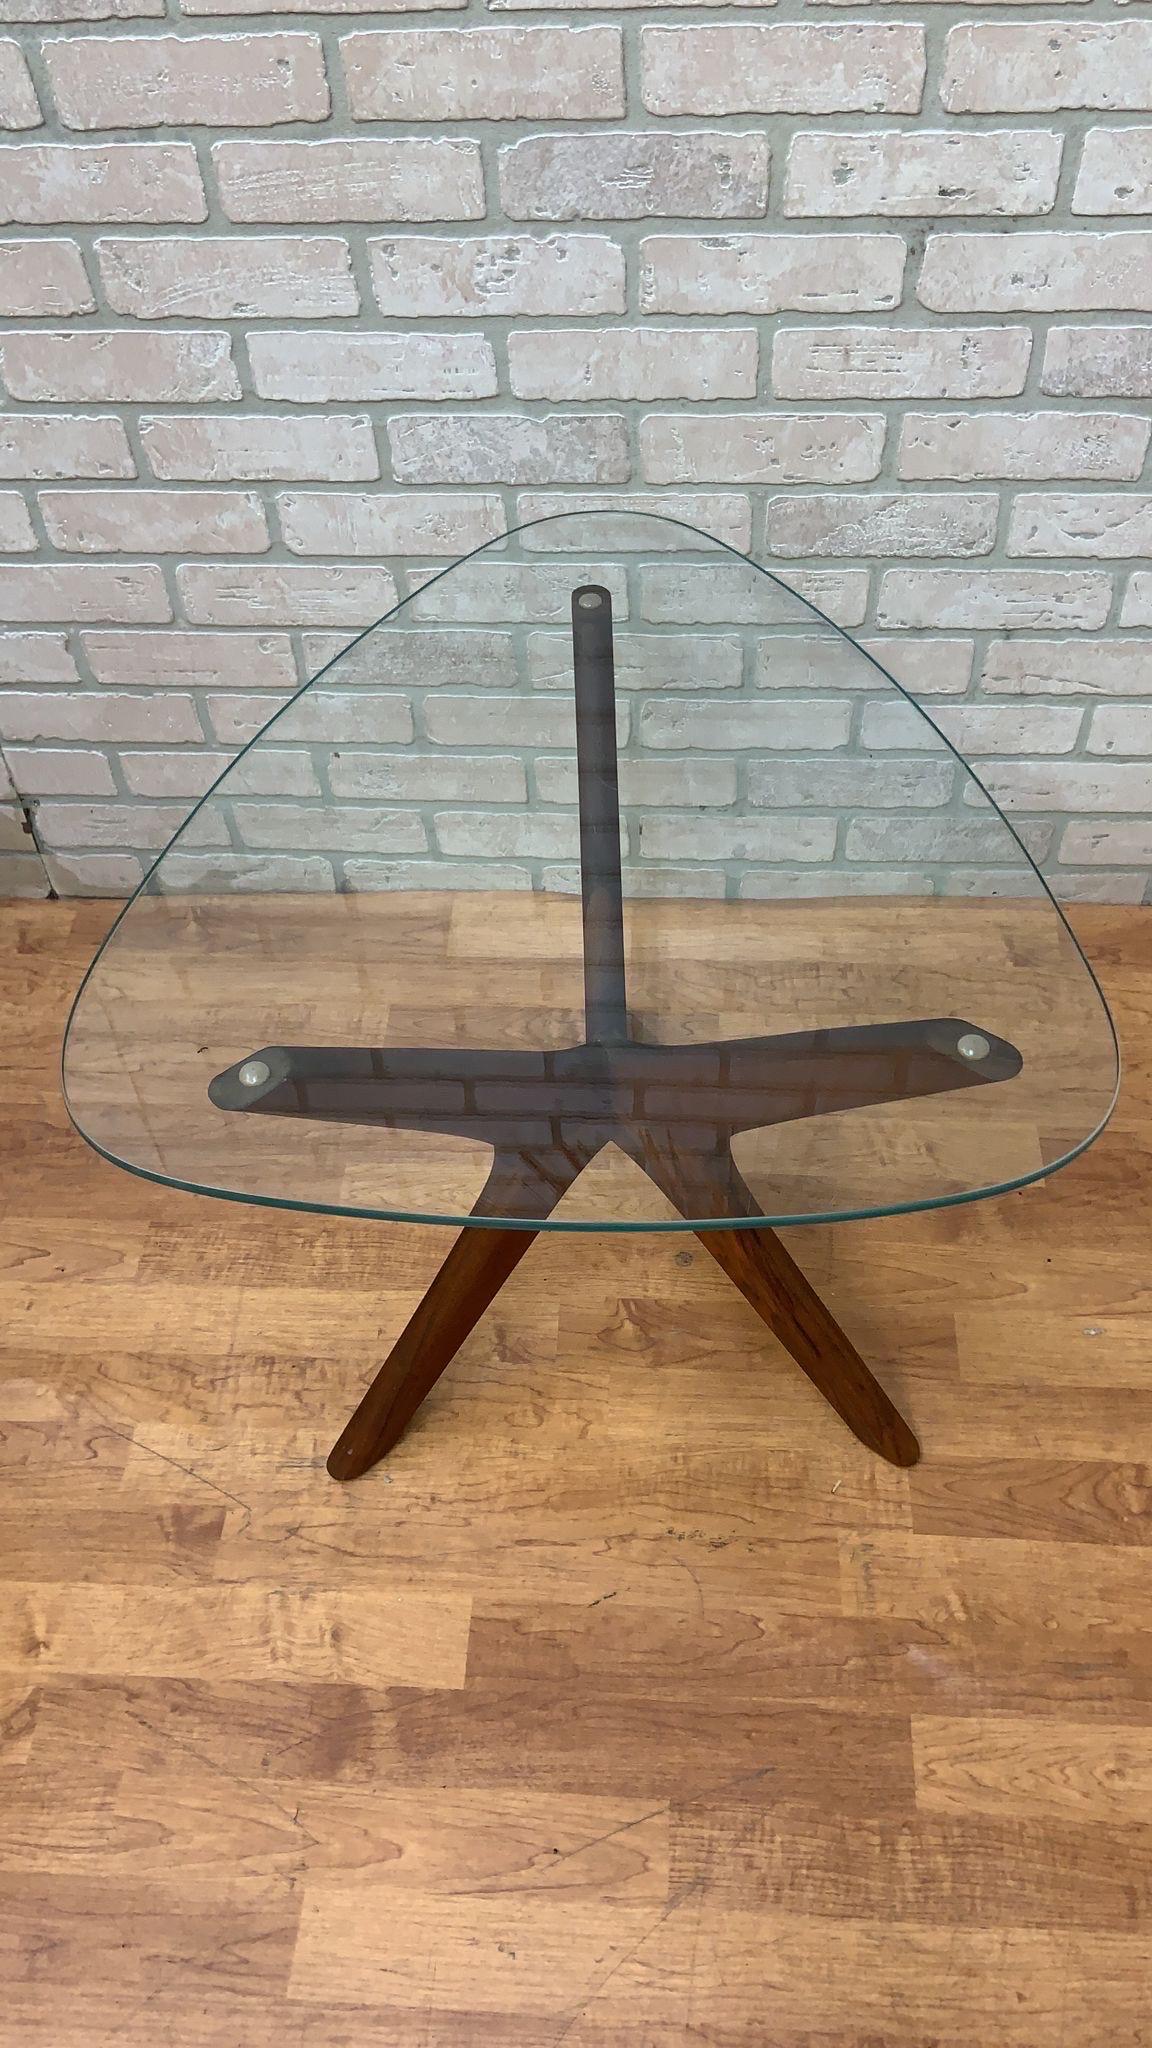 Mid Century Modern Adrian Pearsall Jacks Side Table with Triangular Glass Top Side Table

This Adrian Pearsall for Craft Associates side table is a perfect accent for your living room space. This table is hand-crafted from walnut and on top a